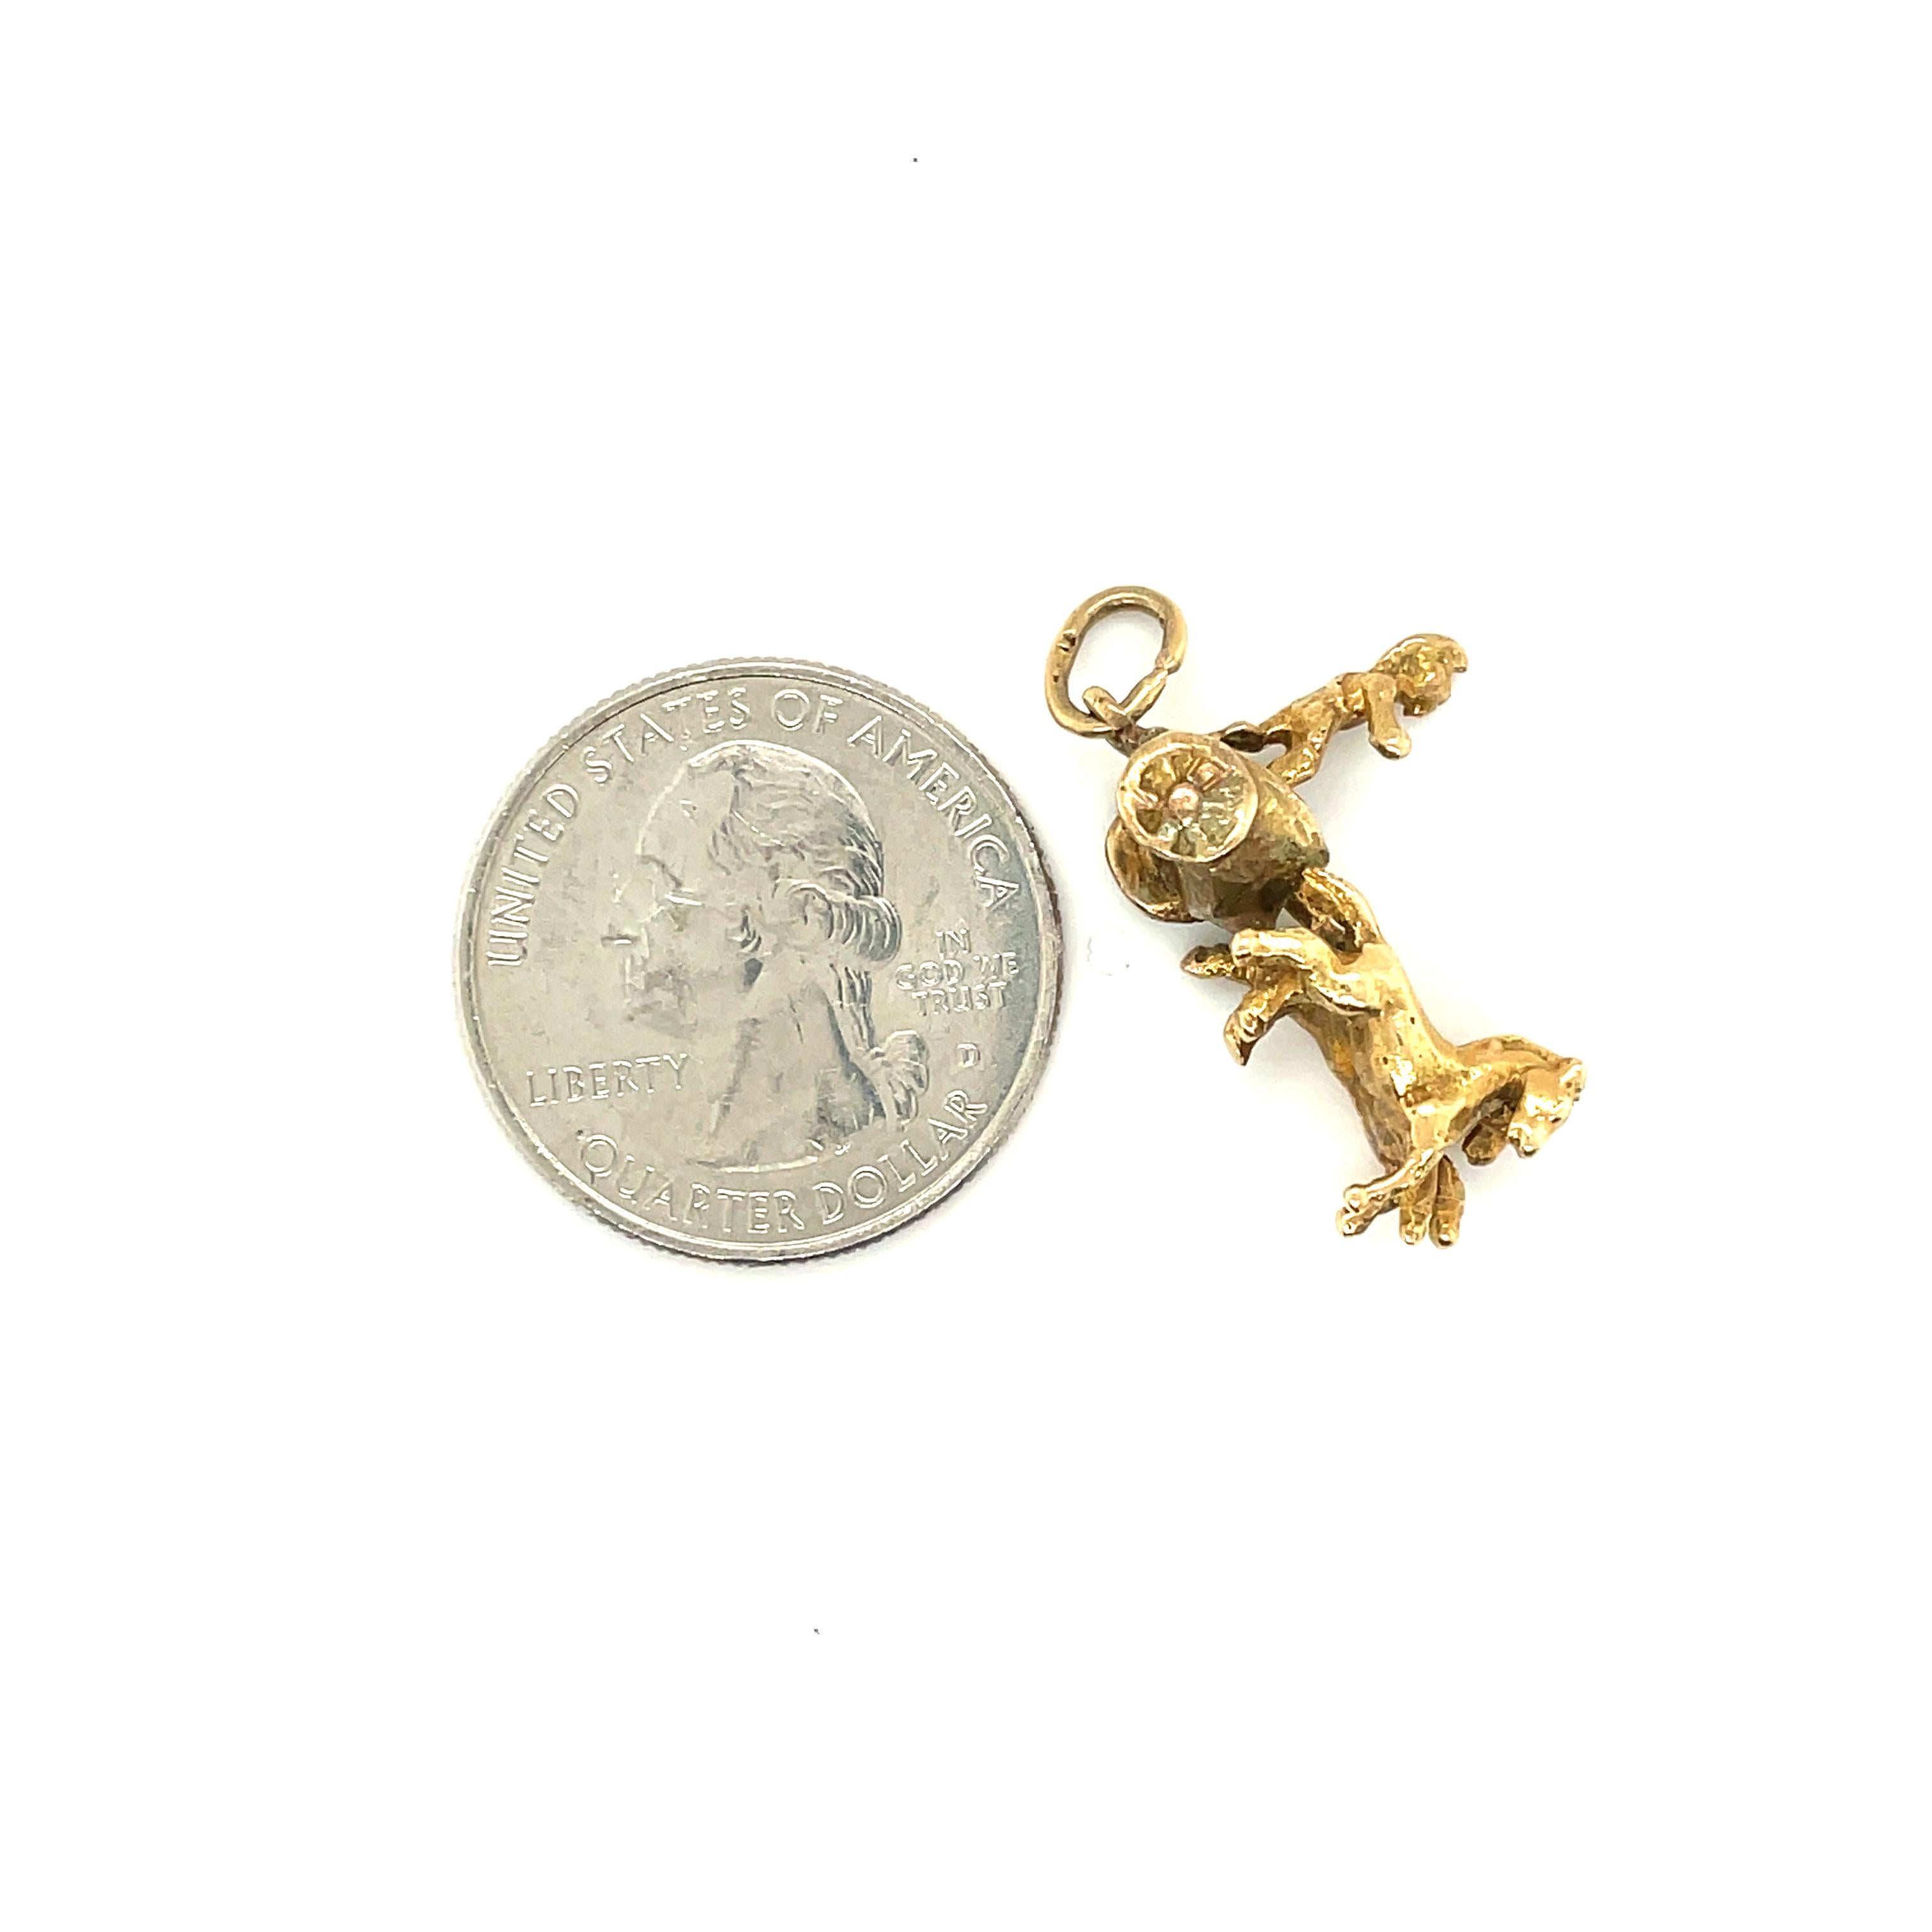 18K Yellow Gold Horse and Chariot Charm

Grams  7.2